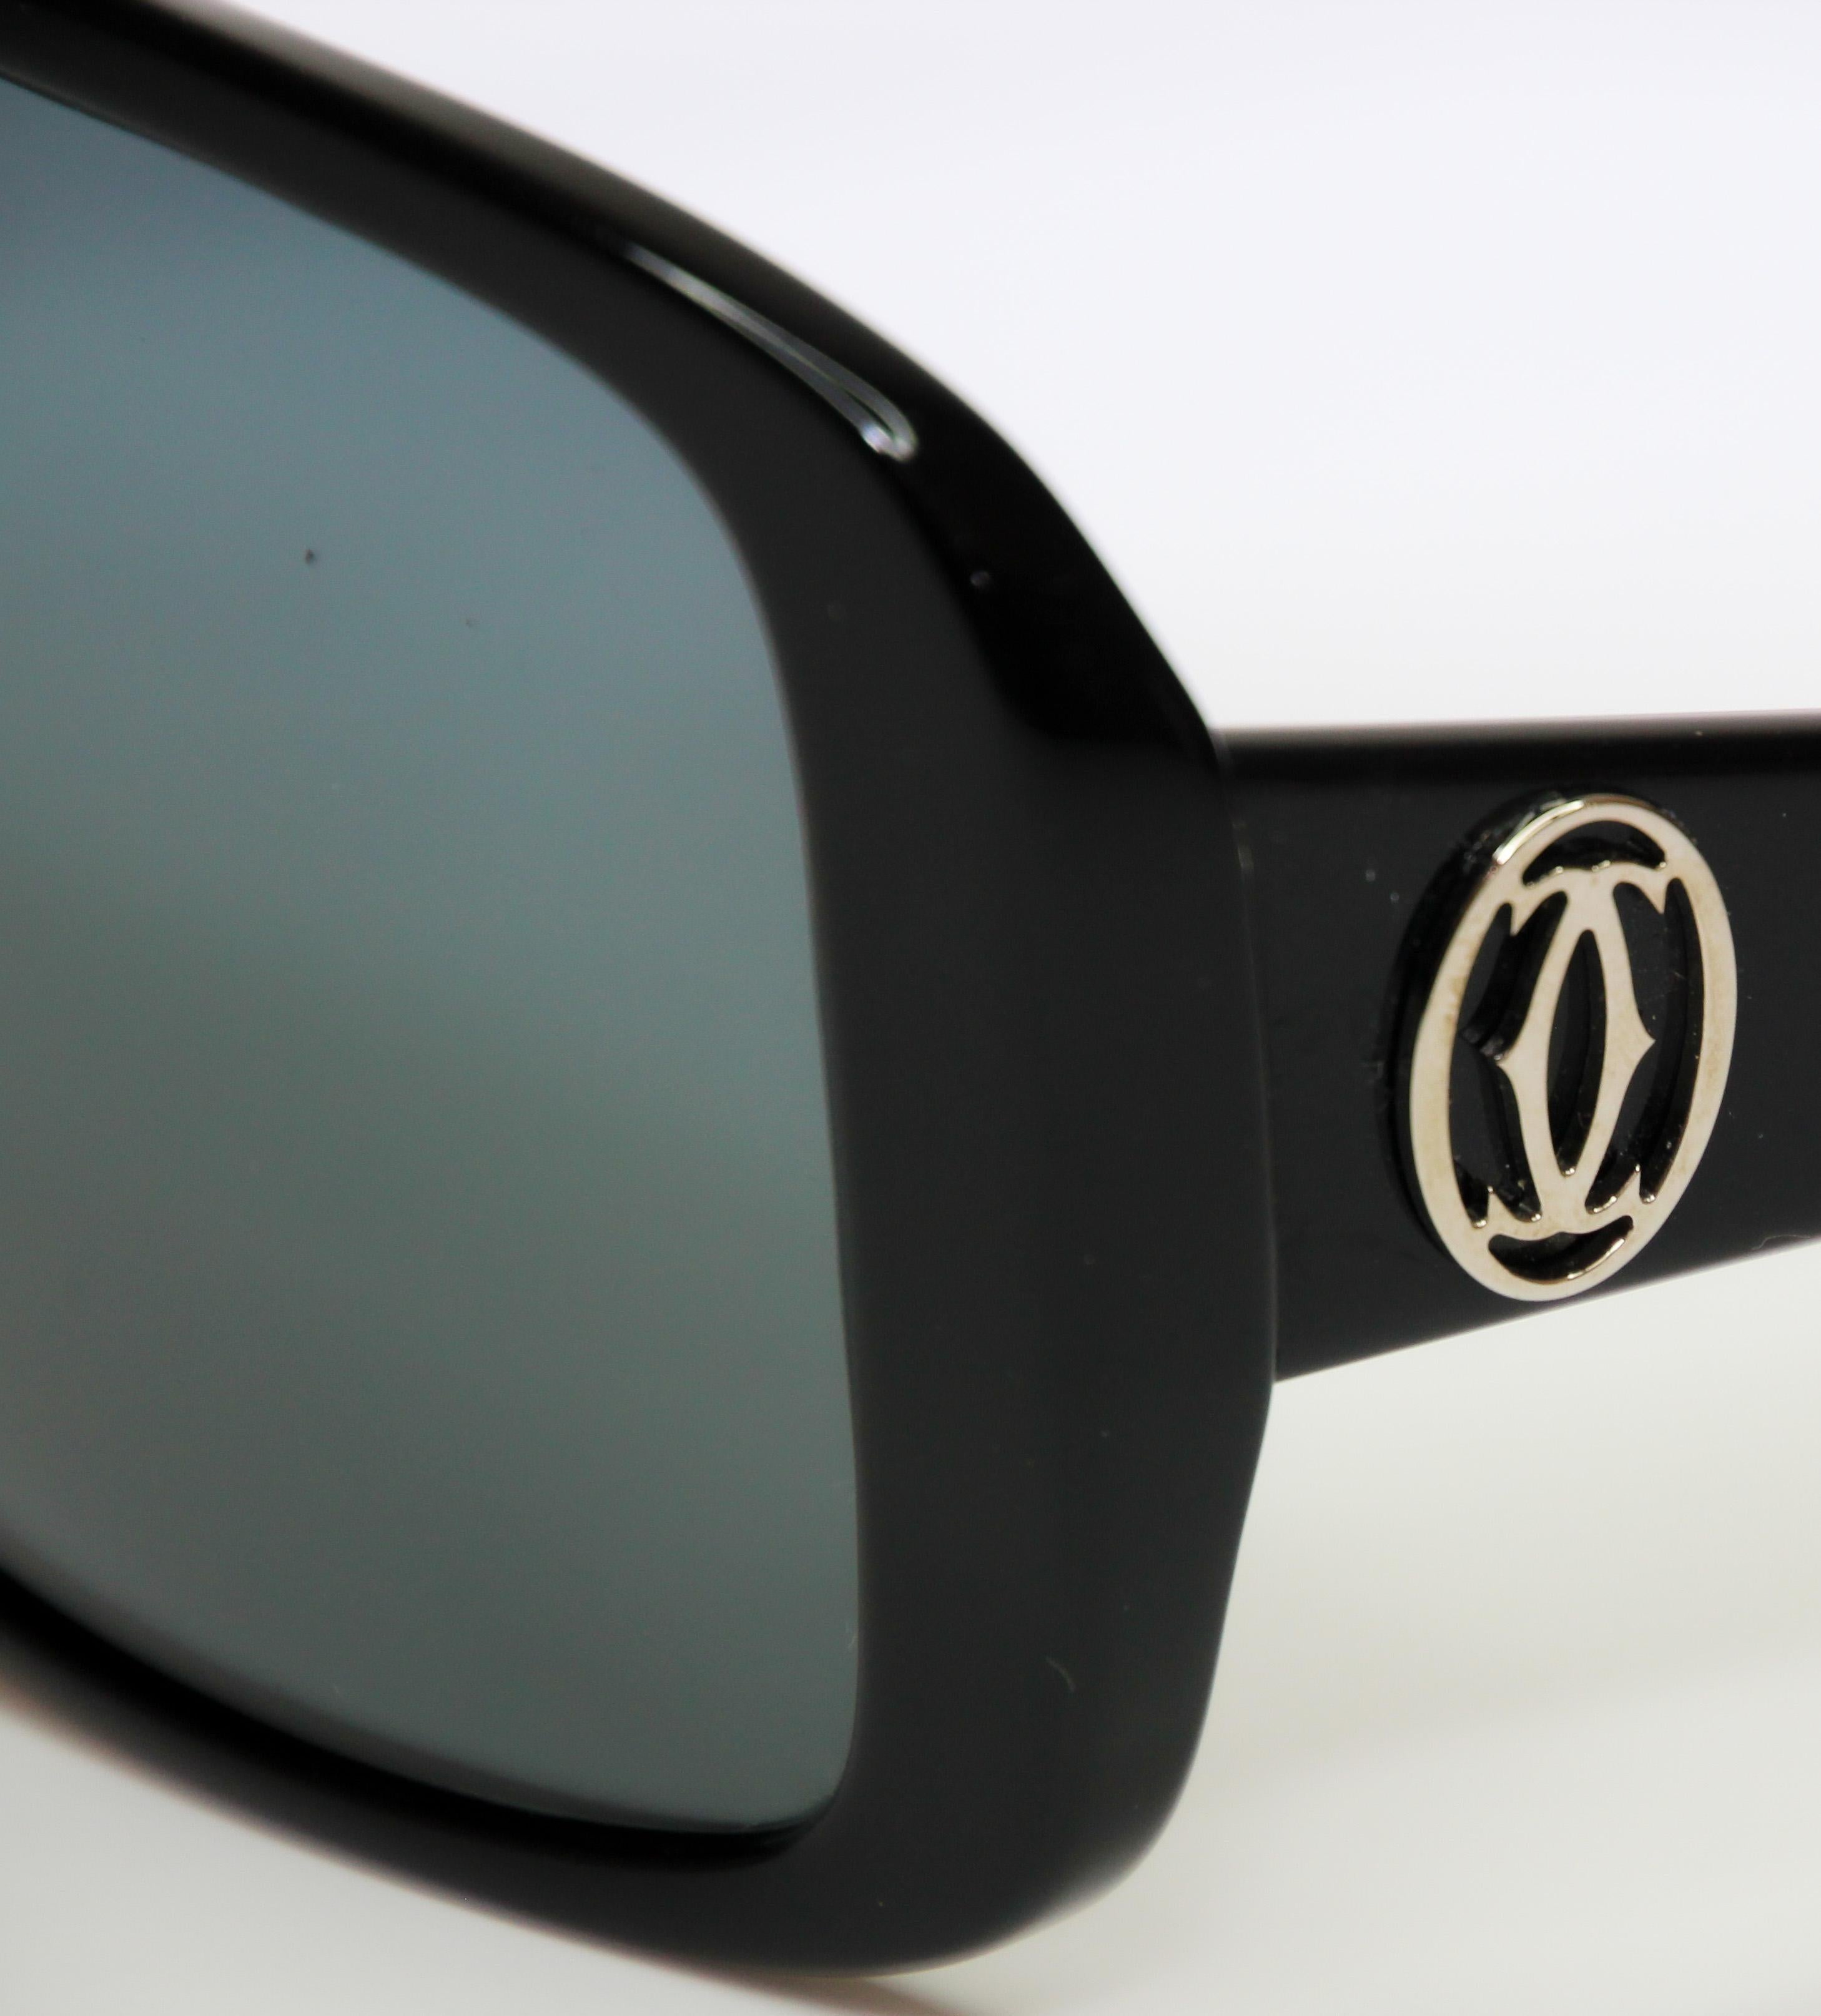 1990s Cartier Vintage Sunglasses Black with Silver Logo In Good Condition For Sale In North Hollywood, CA